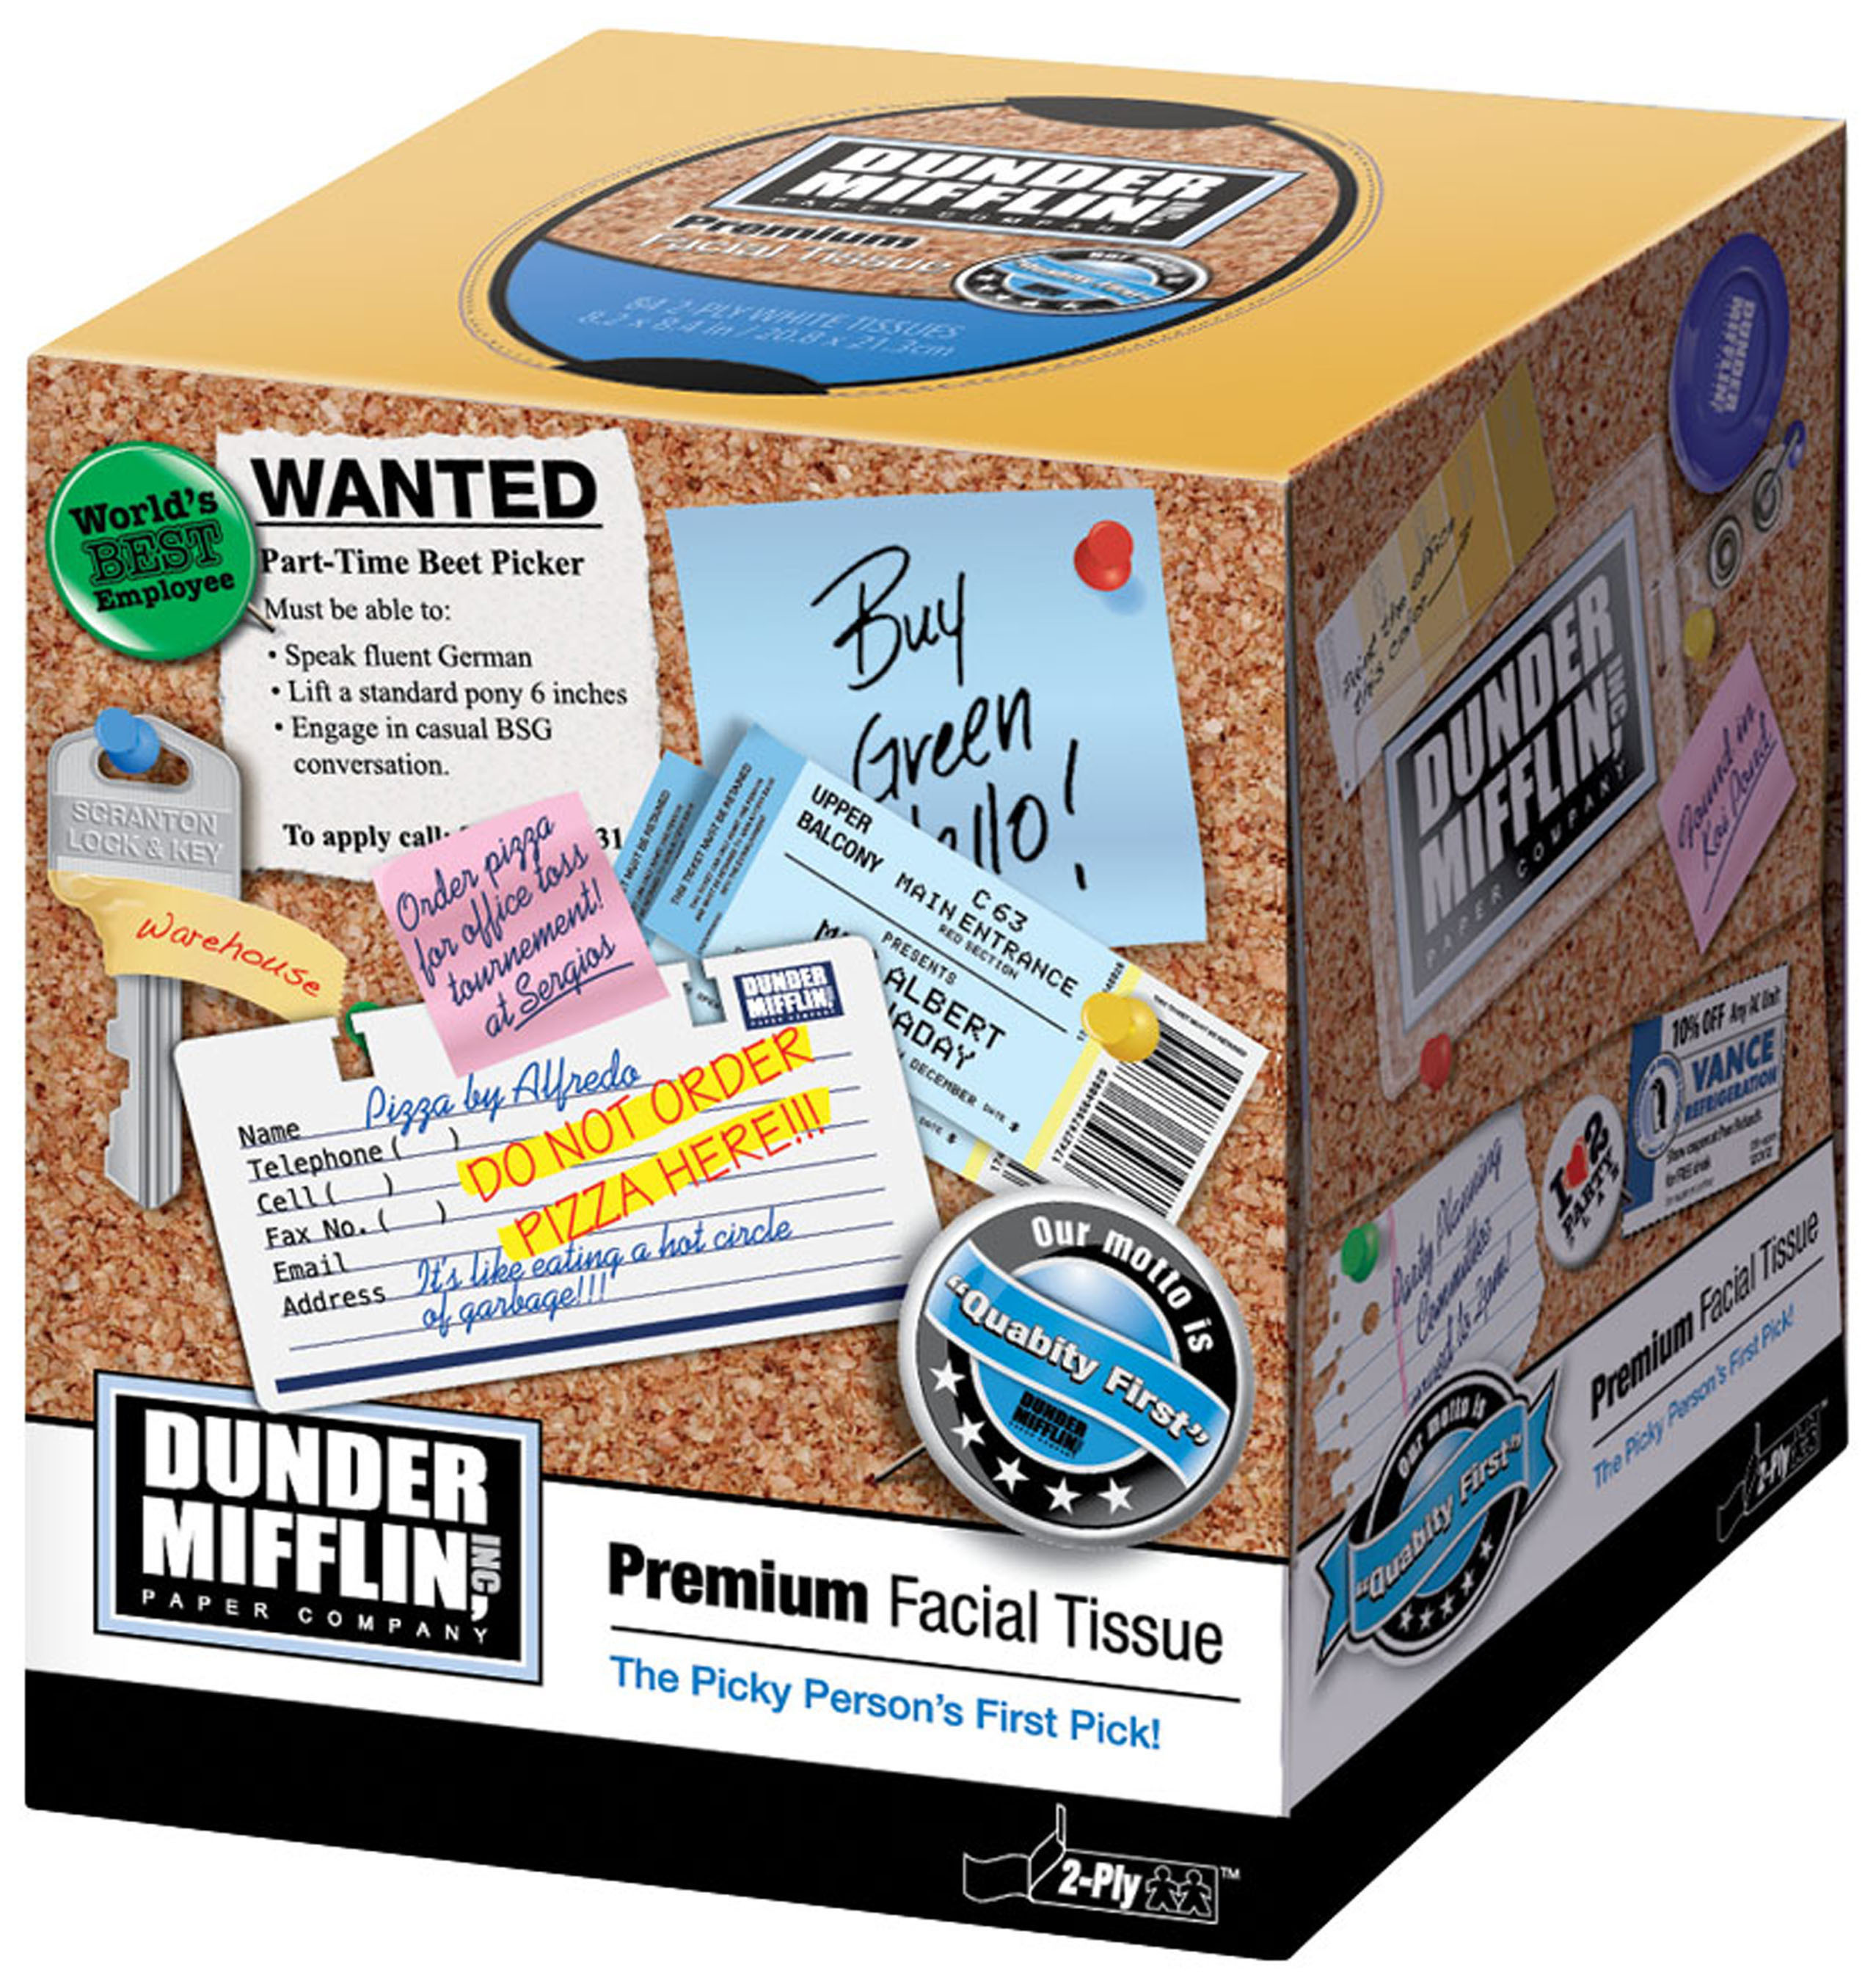 Quill Brings Dunder Mifflin Paper To Life - Office Supplies Junkie